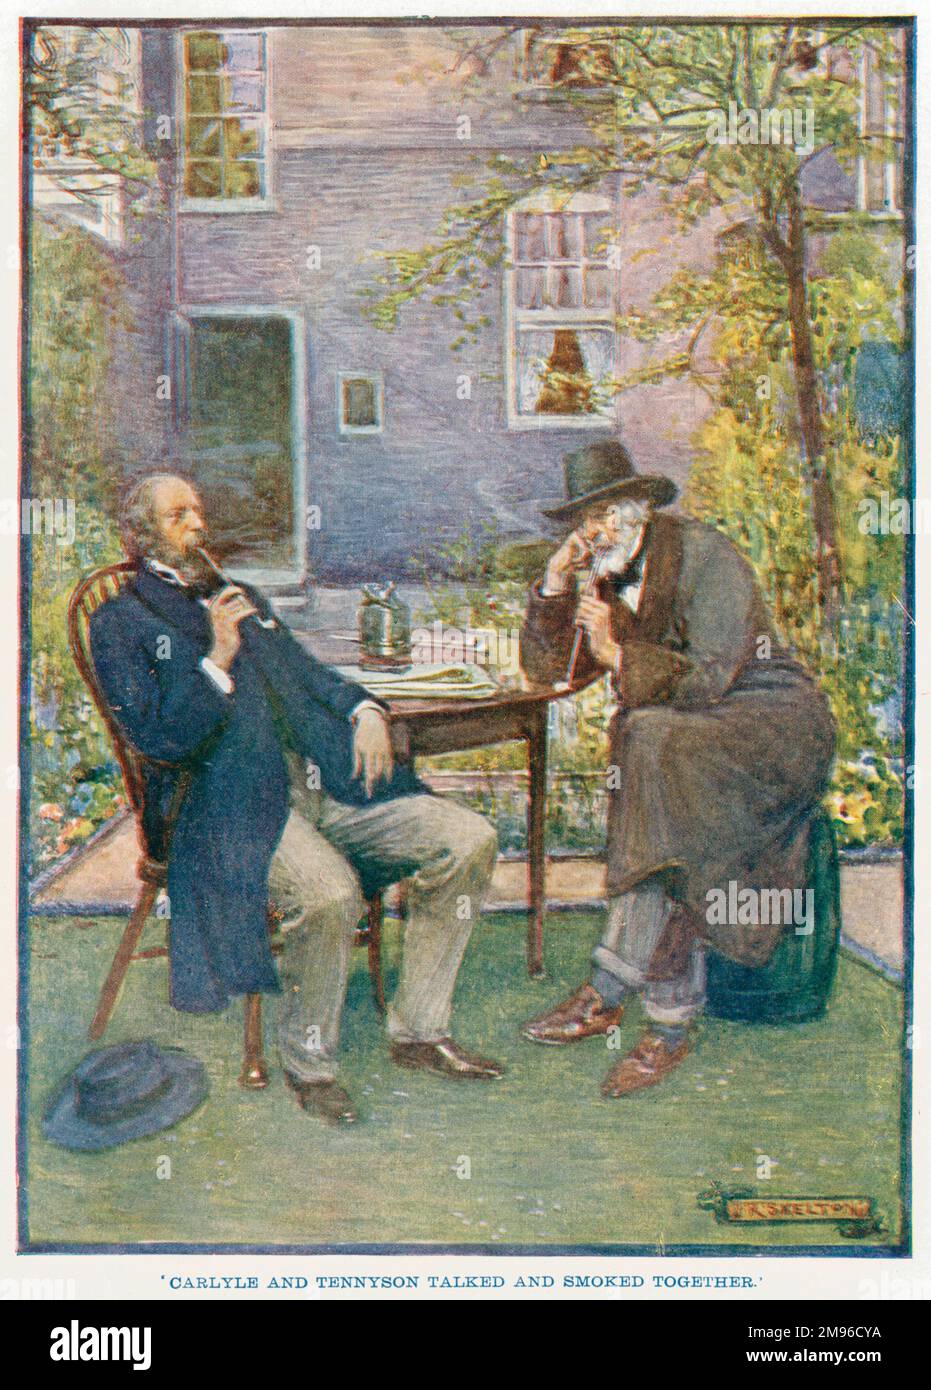 Alfred, Lord Tennyson (1809 - 1892) (left) and Thomas Carlyle (1795 - 1881) talking and smoking together in the garden of Carlyle's house. Stock Photo